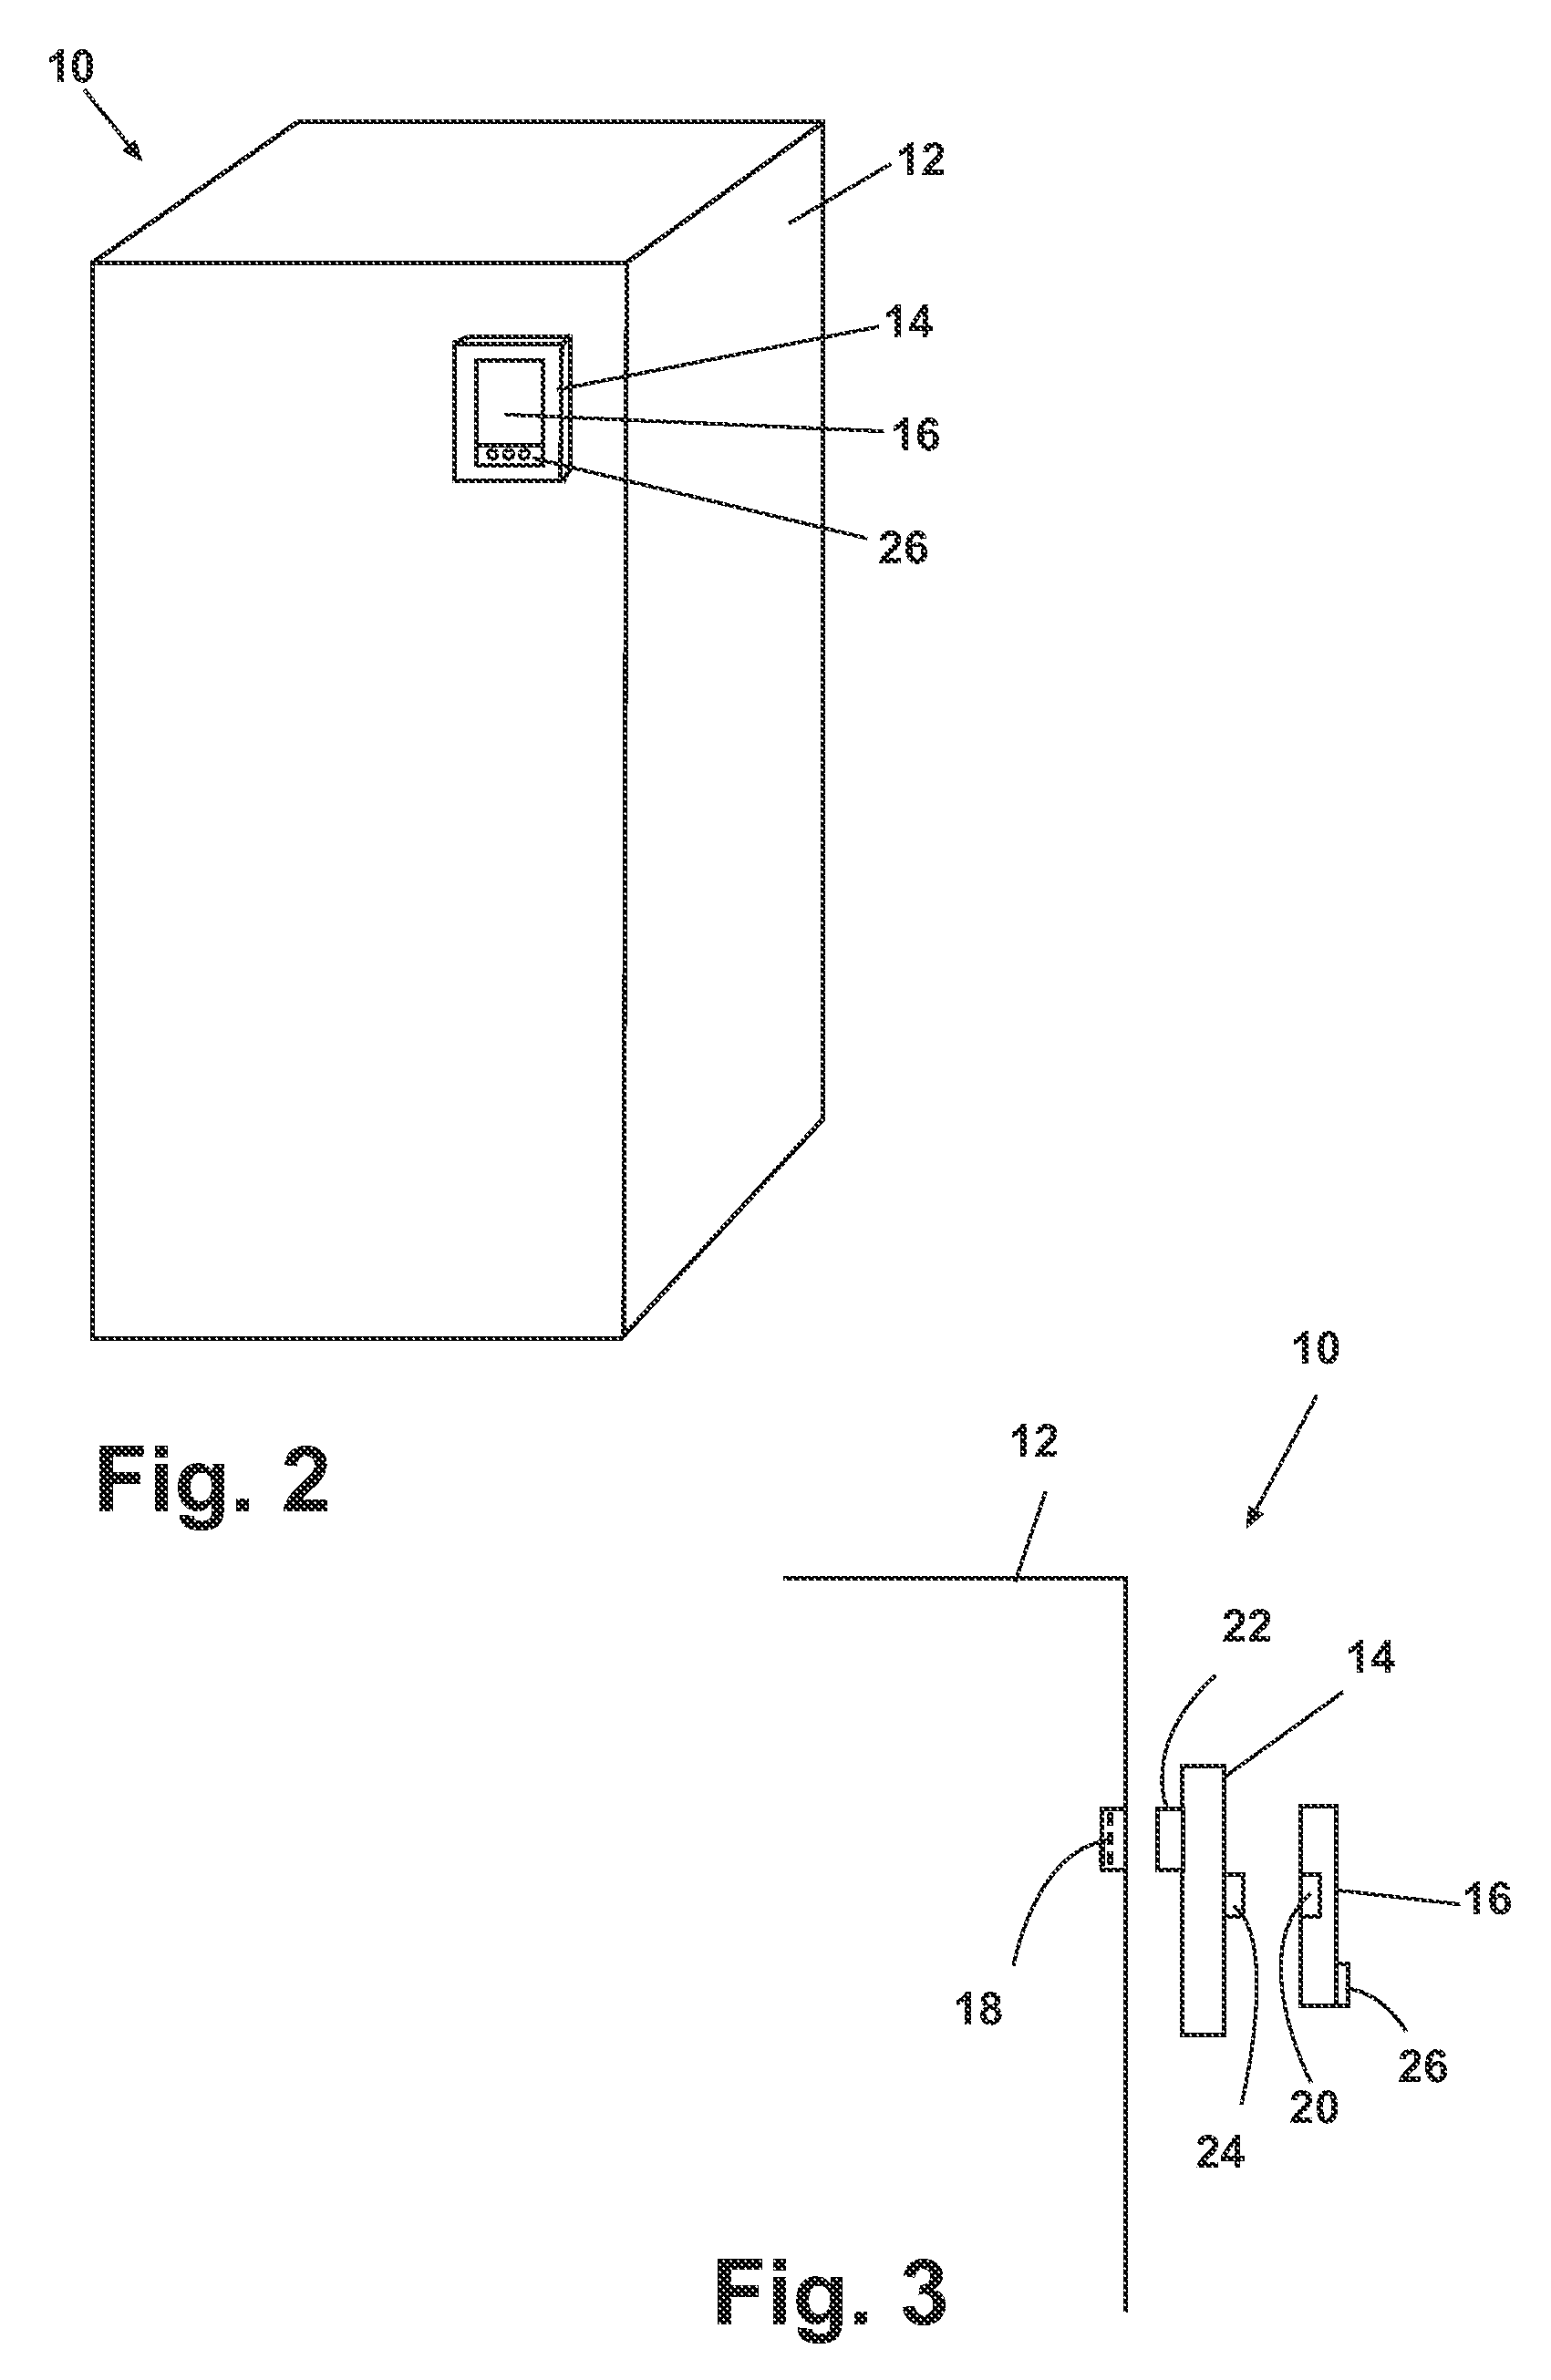 Host and Adapter for Selectively Positioning a Consumer Electronic Display in Visible and Concealed Orientations